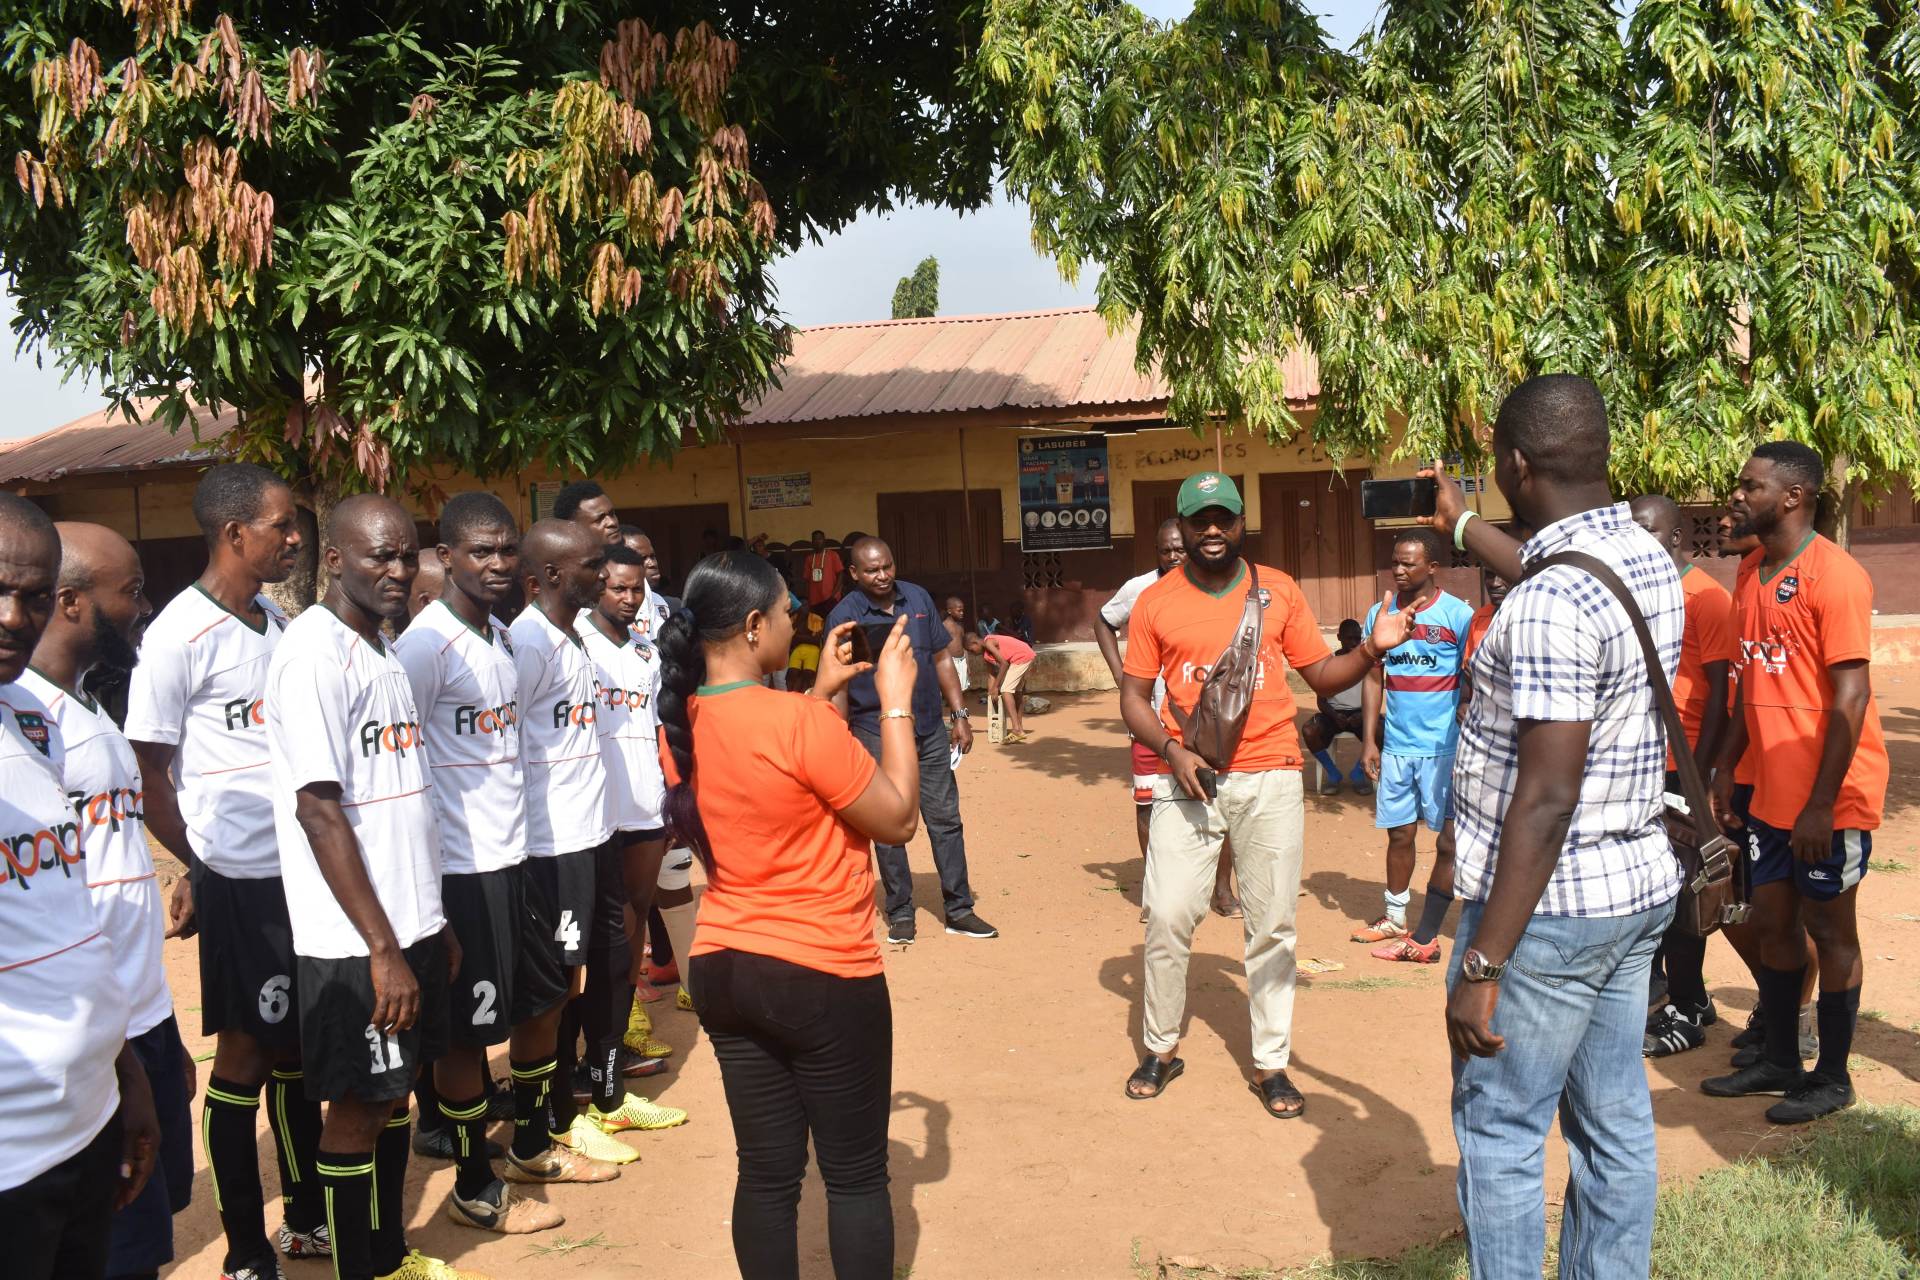 Frapapa BET official addressing both teams before the novelty match kick-off